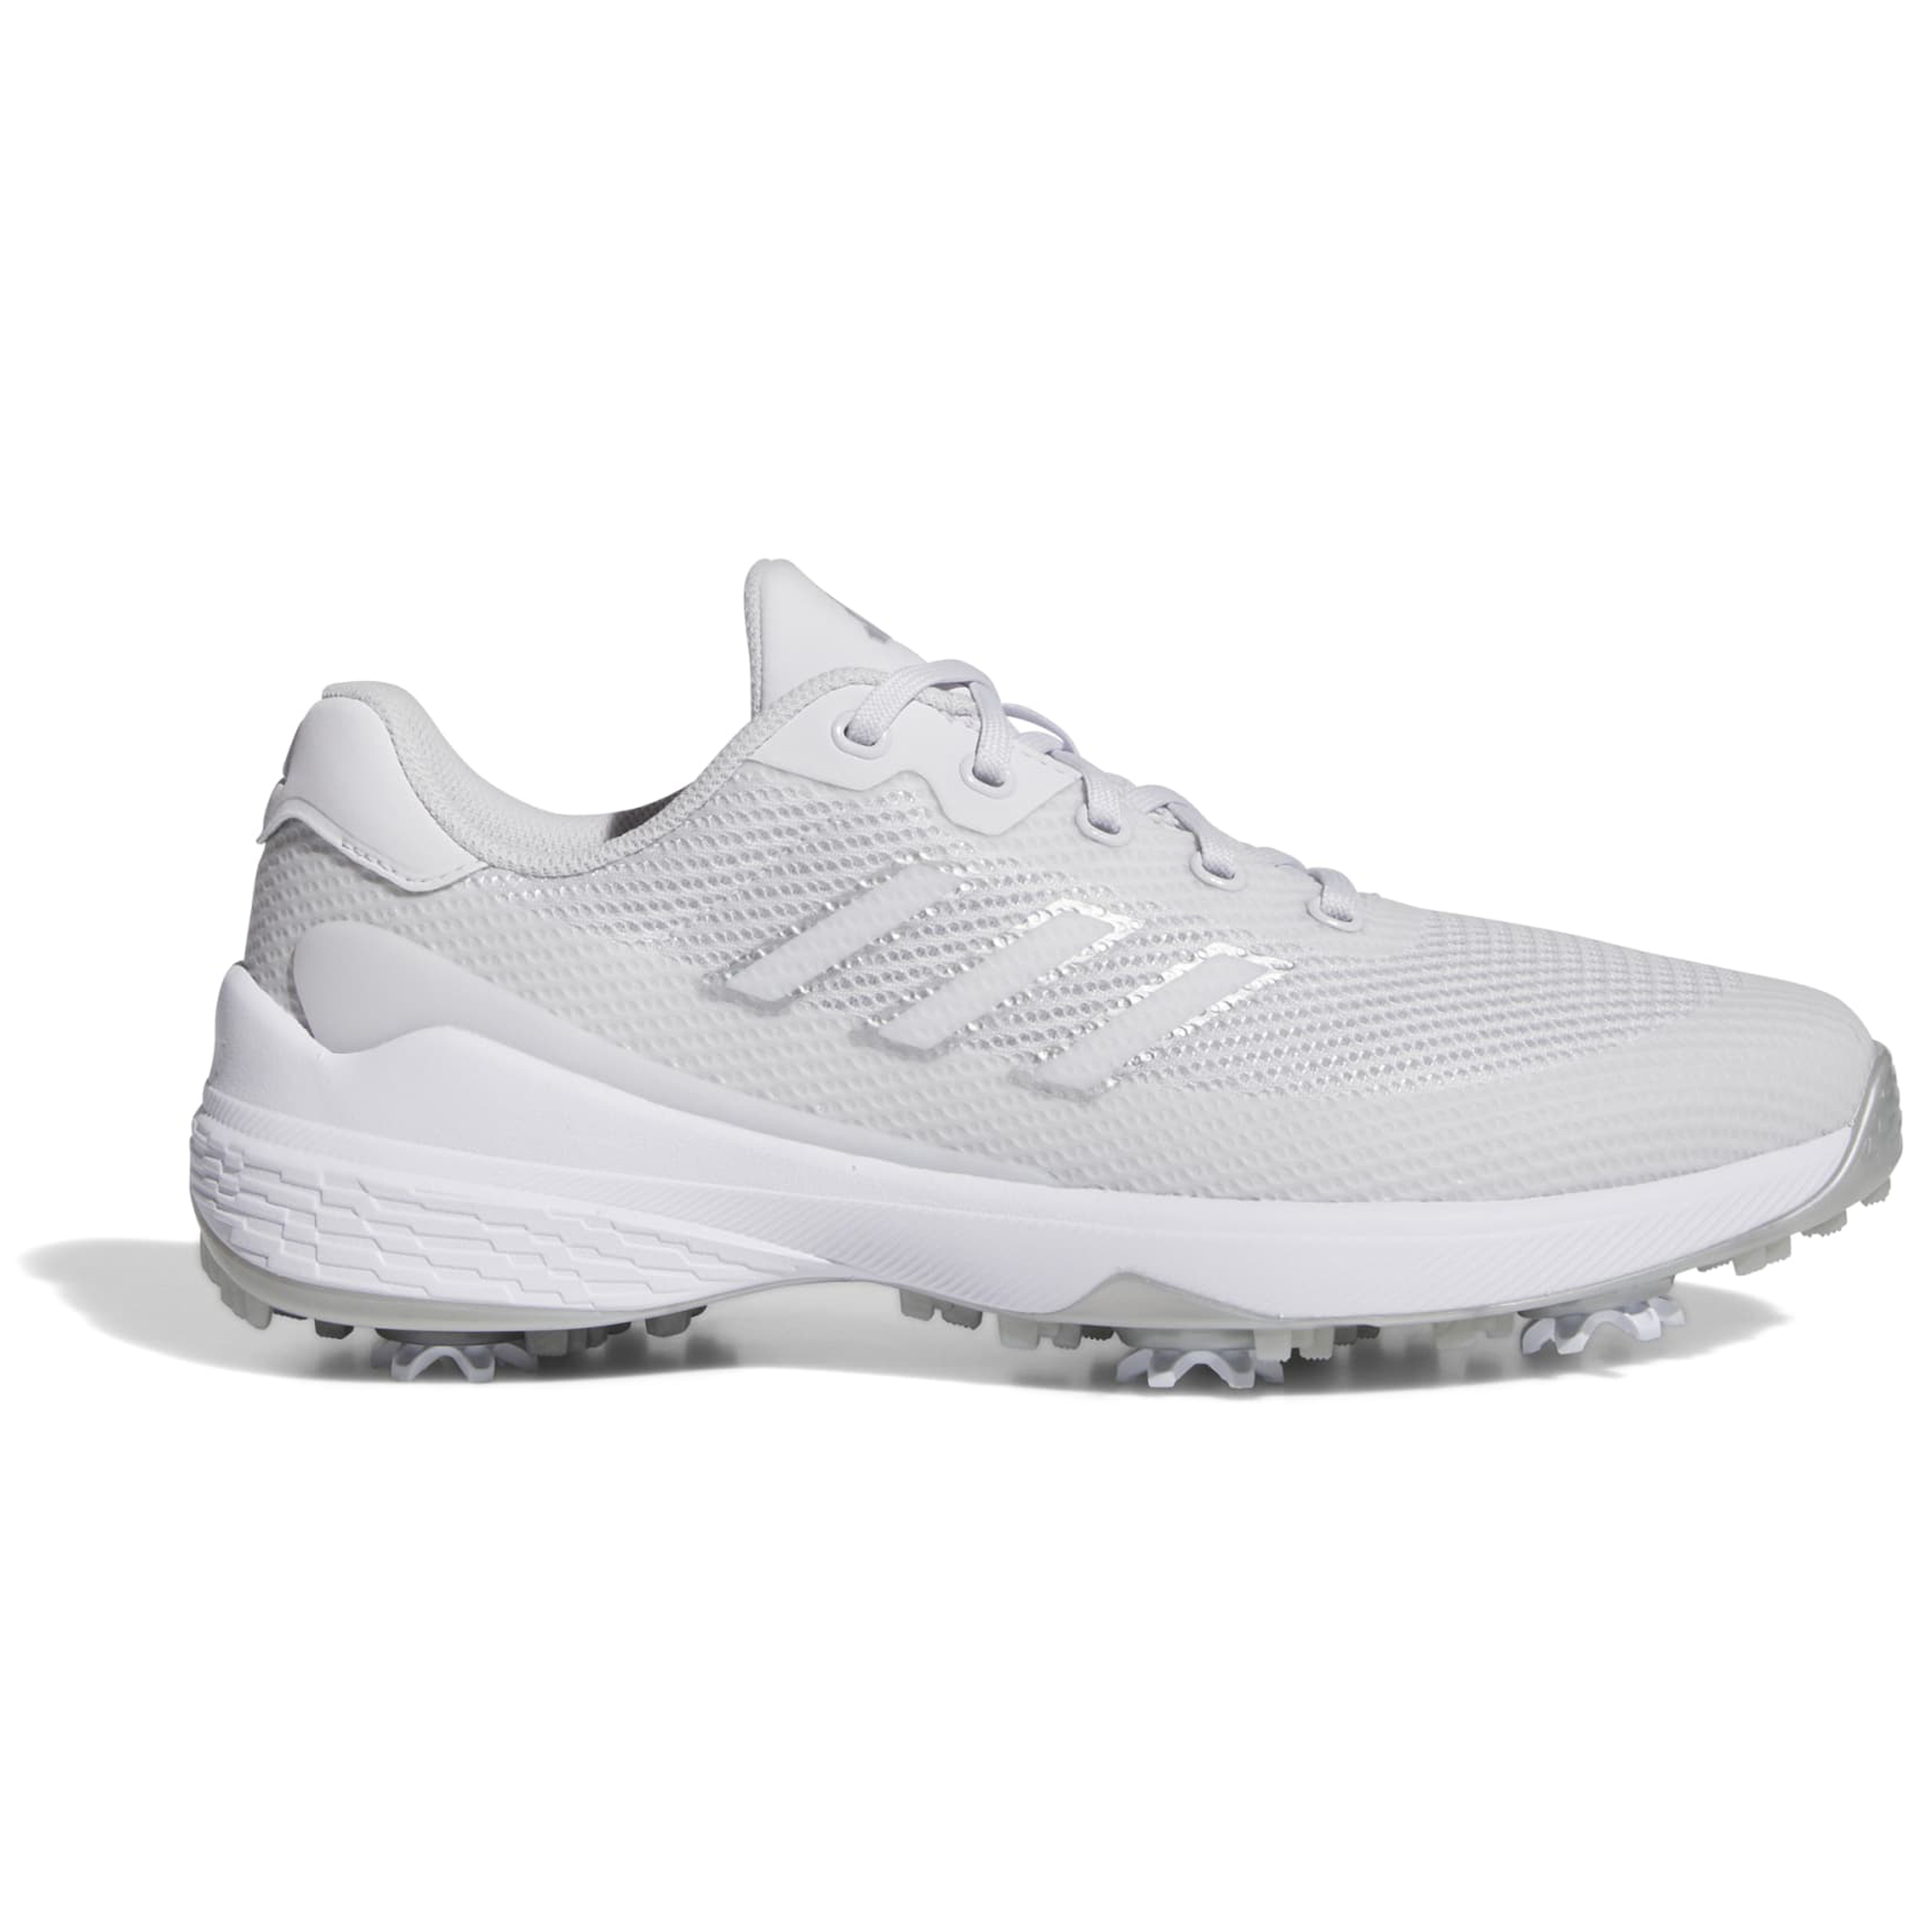 adidas ZG23 Vent Mens Spiked Golf Shoes  - Dash Grey/Cloud White